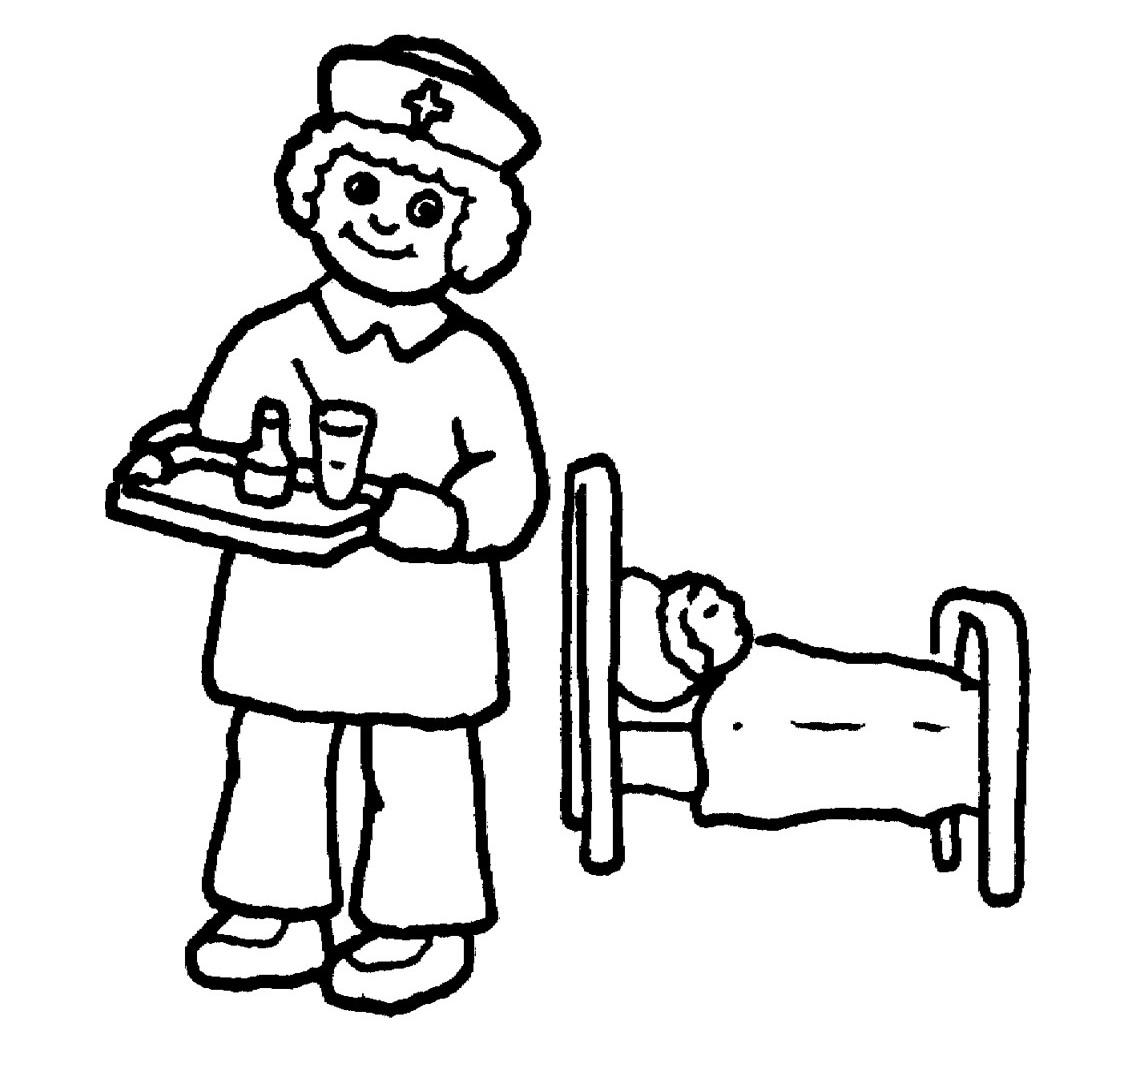 Nursing Coloring Pages Free Pictures Of Nurses For Kids Download Free Clip Art Free Clip